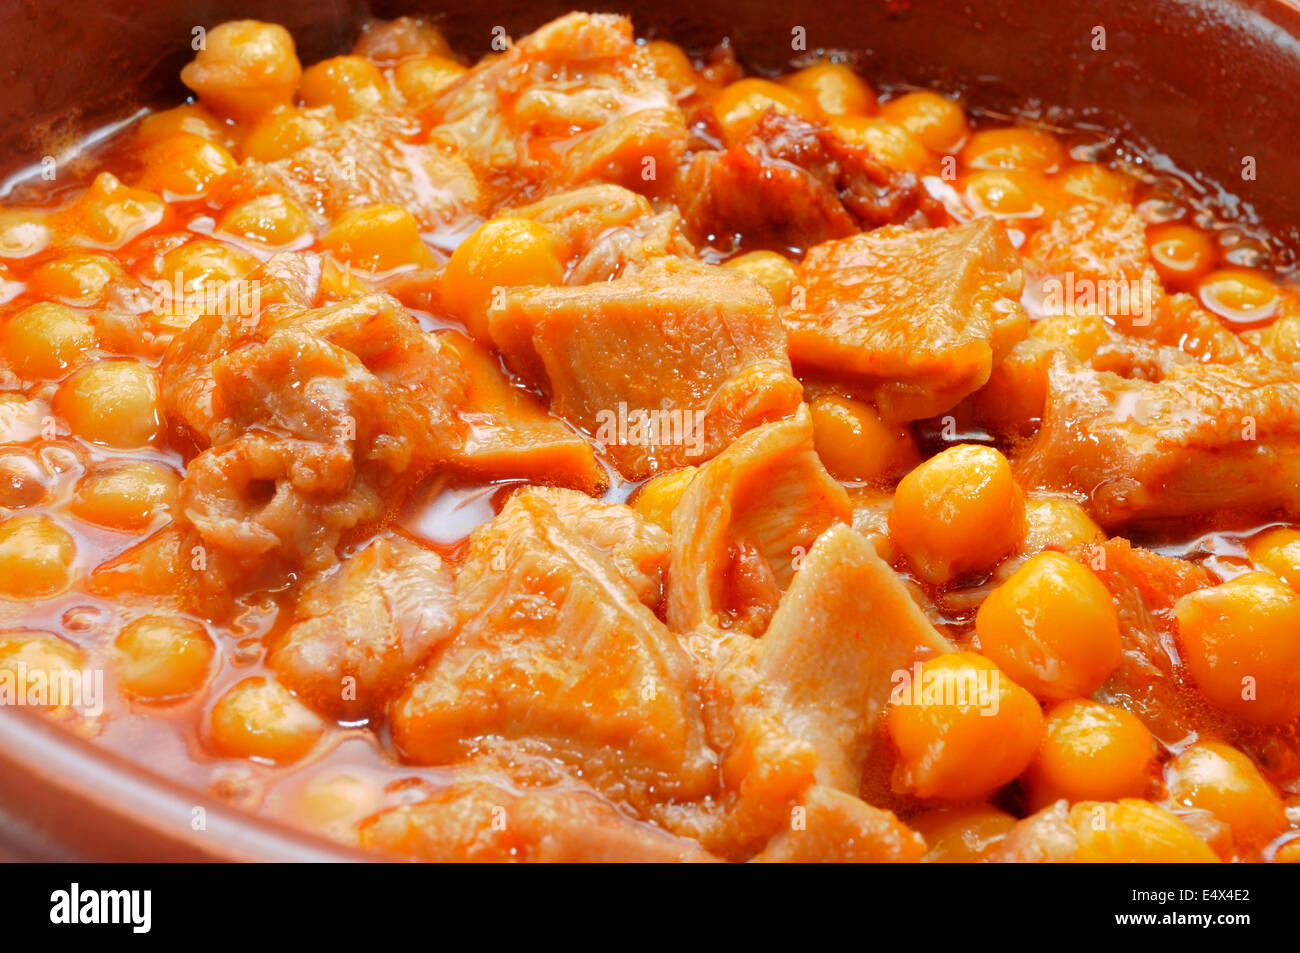 Beef Tripe High Resolution Stock Photography And Images Alamy,Ground Cardamom Spice